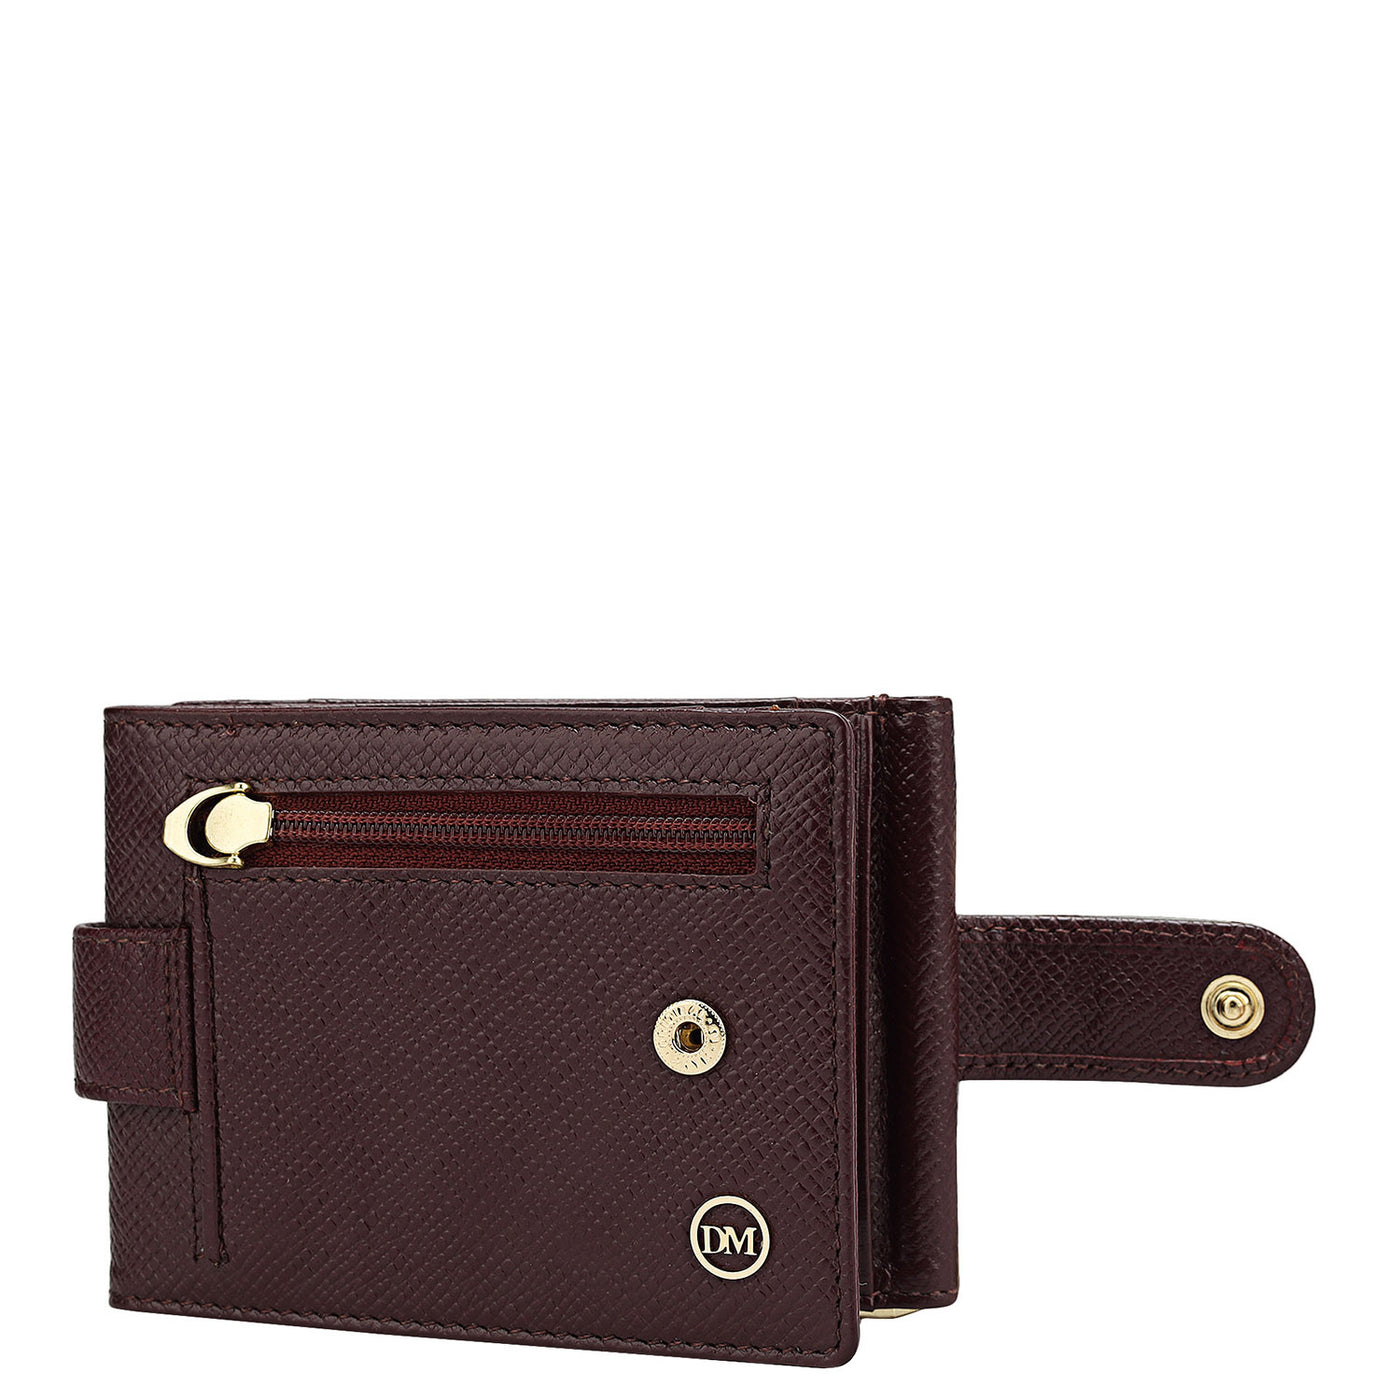 Franzy Leather Money Clip - Blood Stone